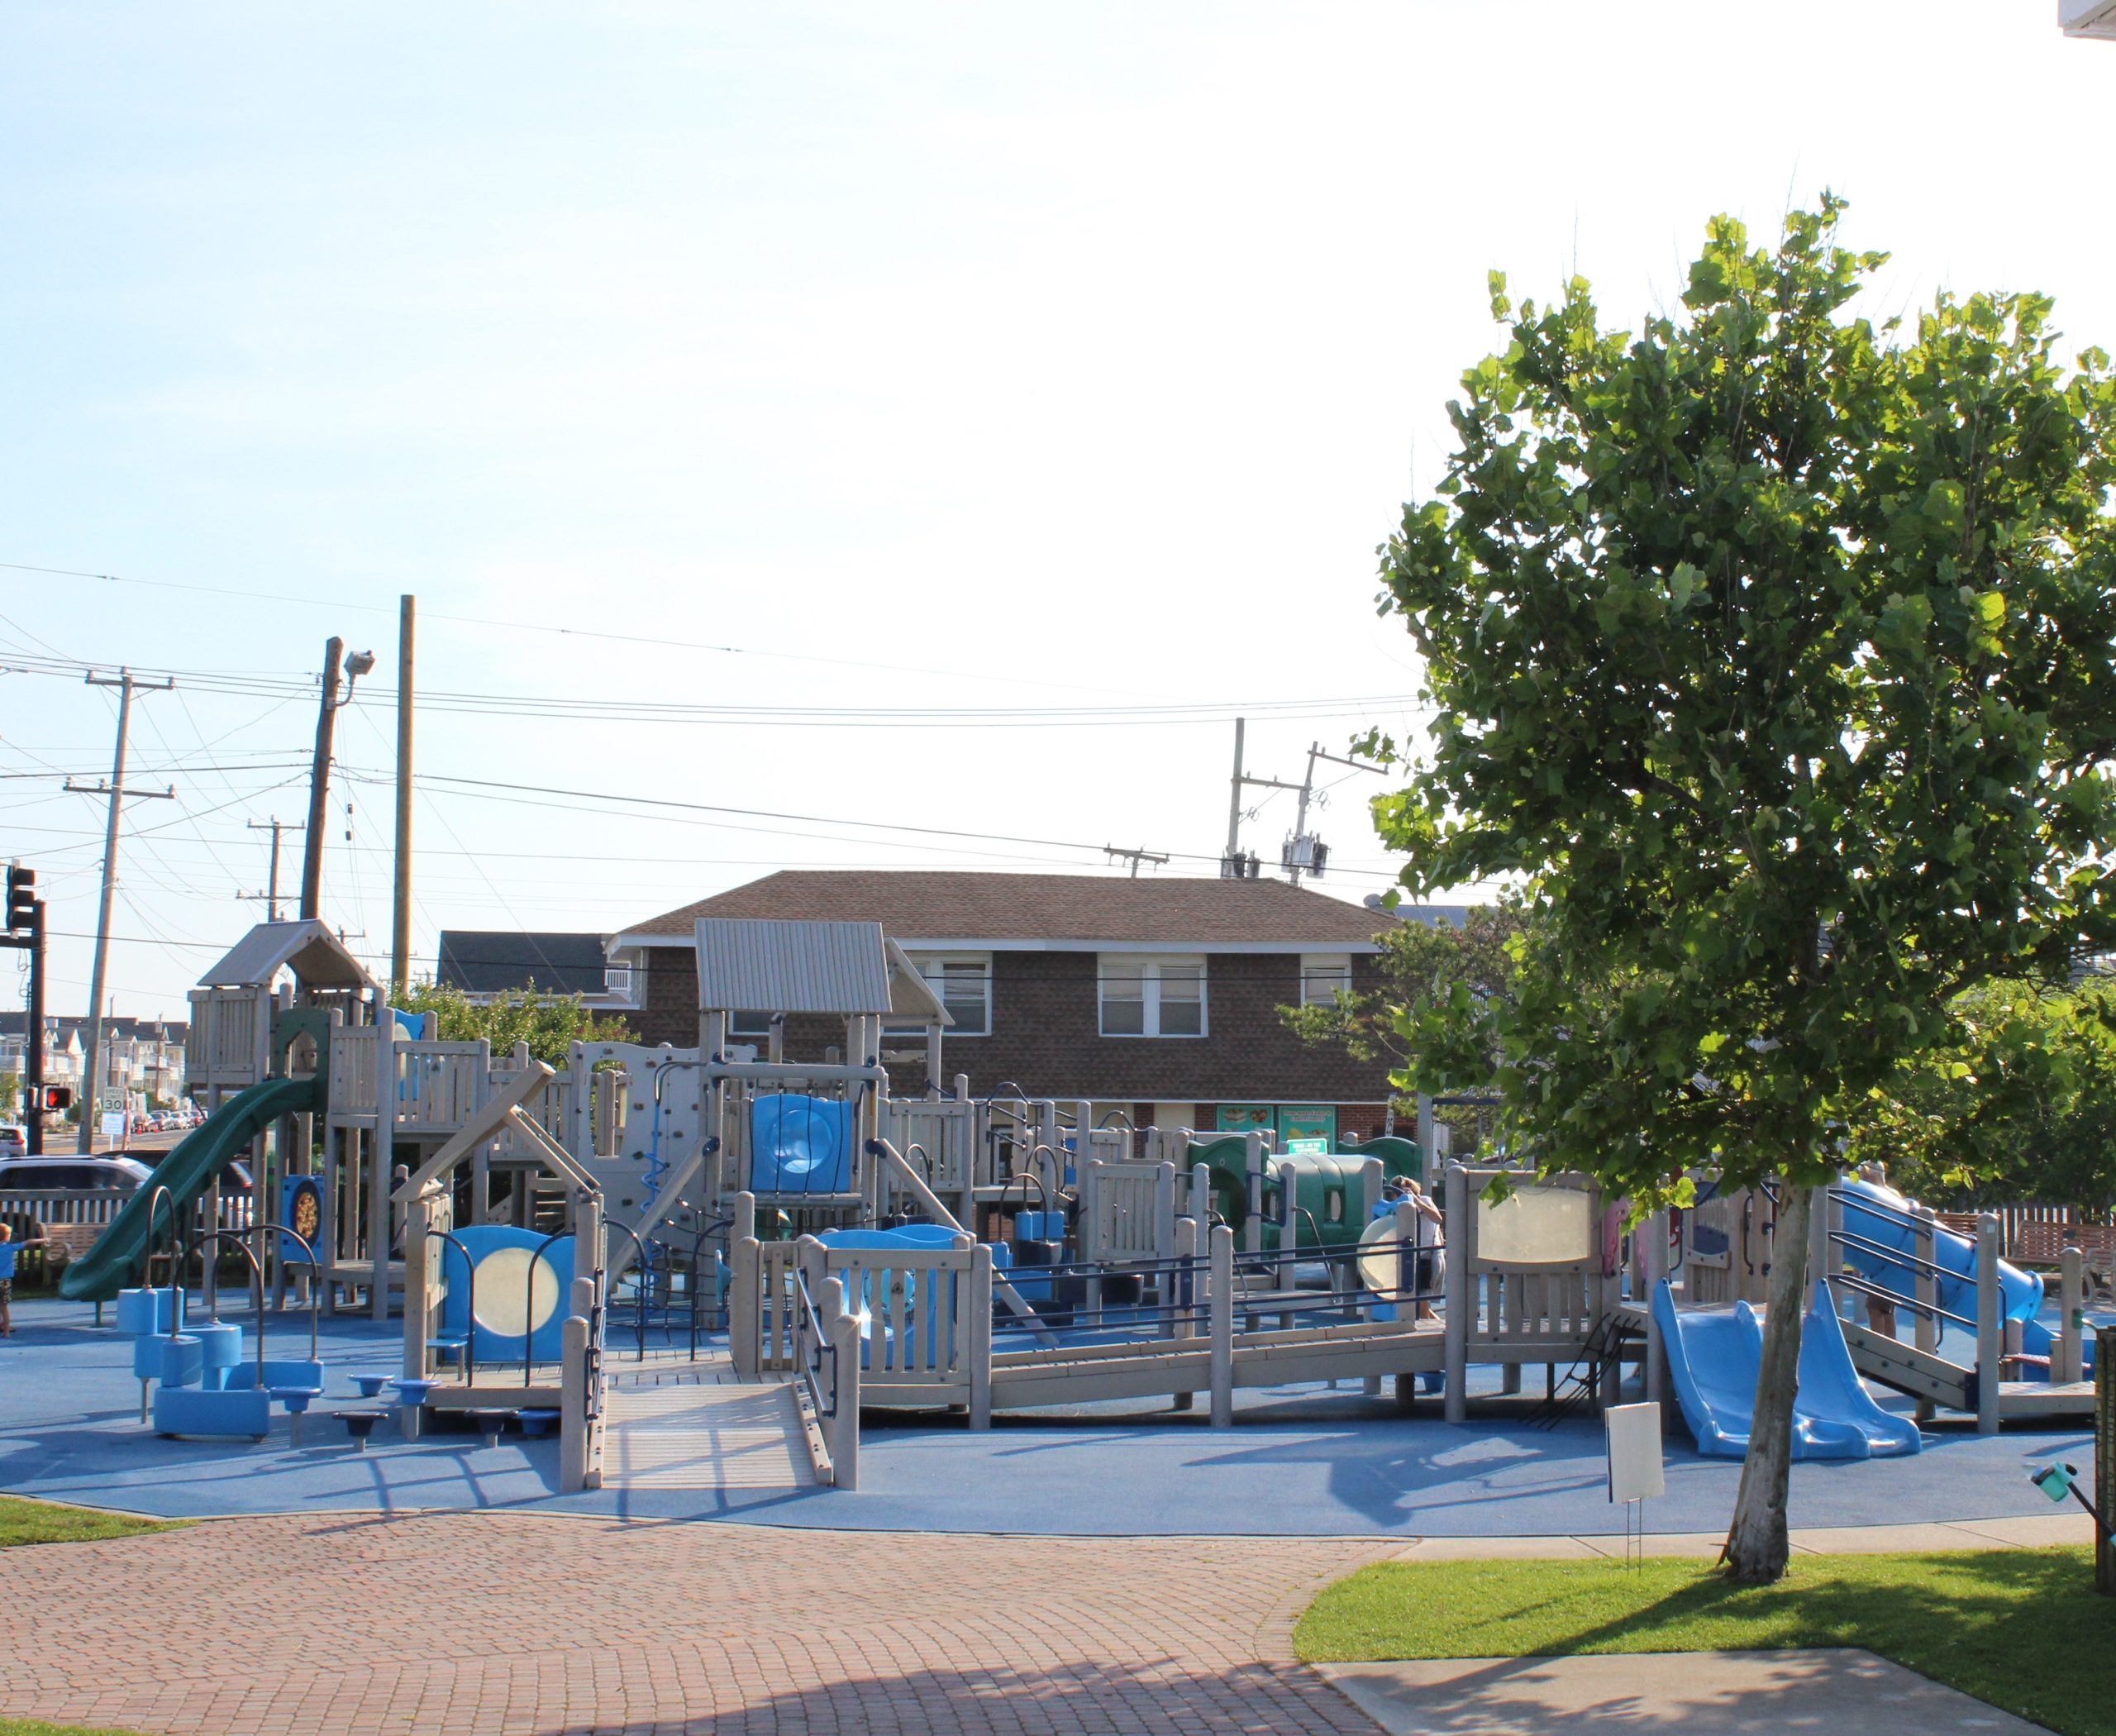 Sandcastle Park Playground in Ocean City NJ horizontal picture of front of both playgrounds GOOD